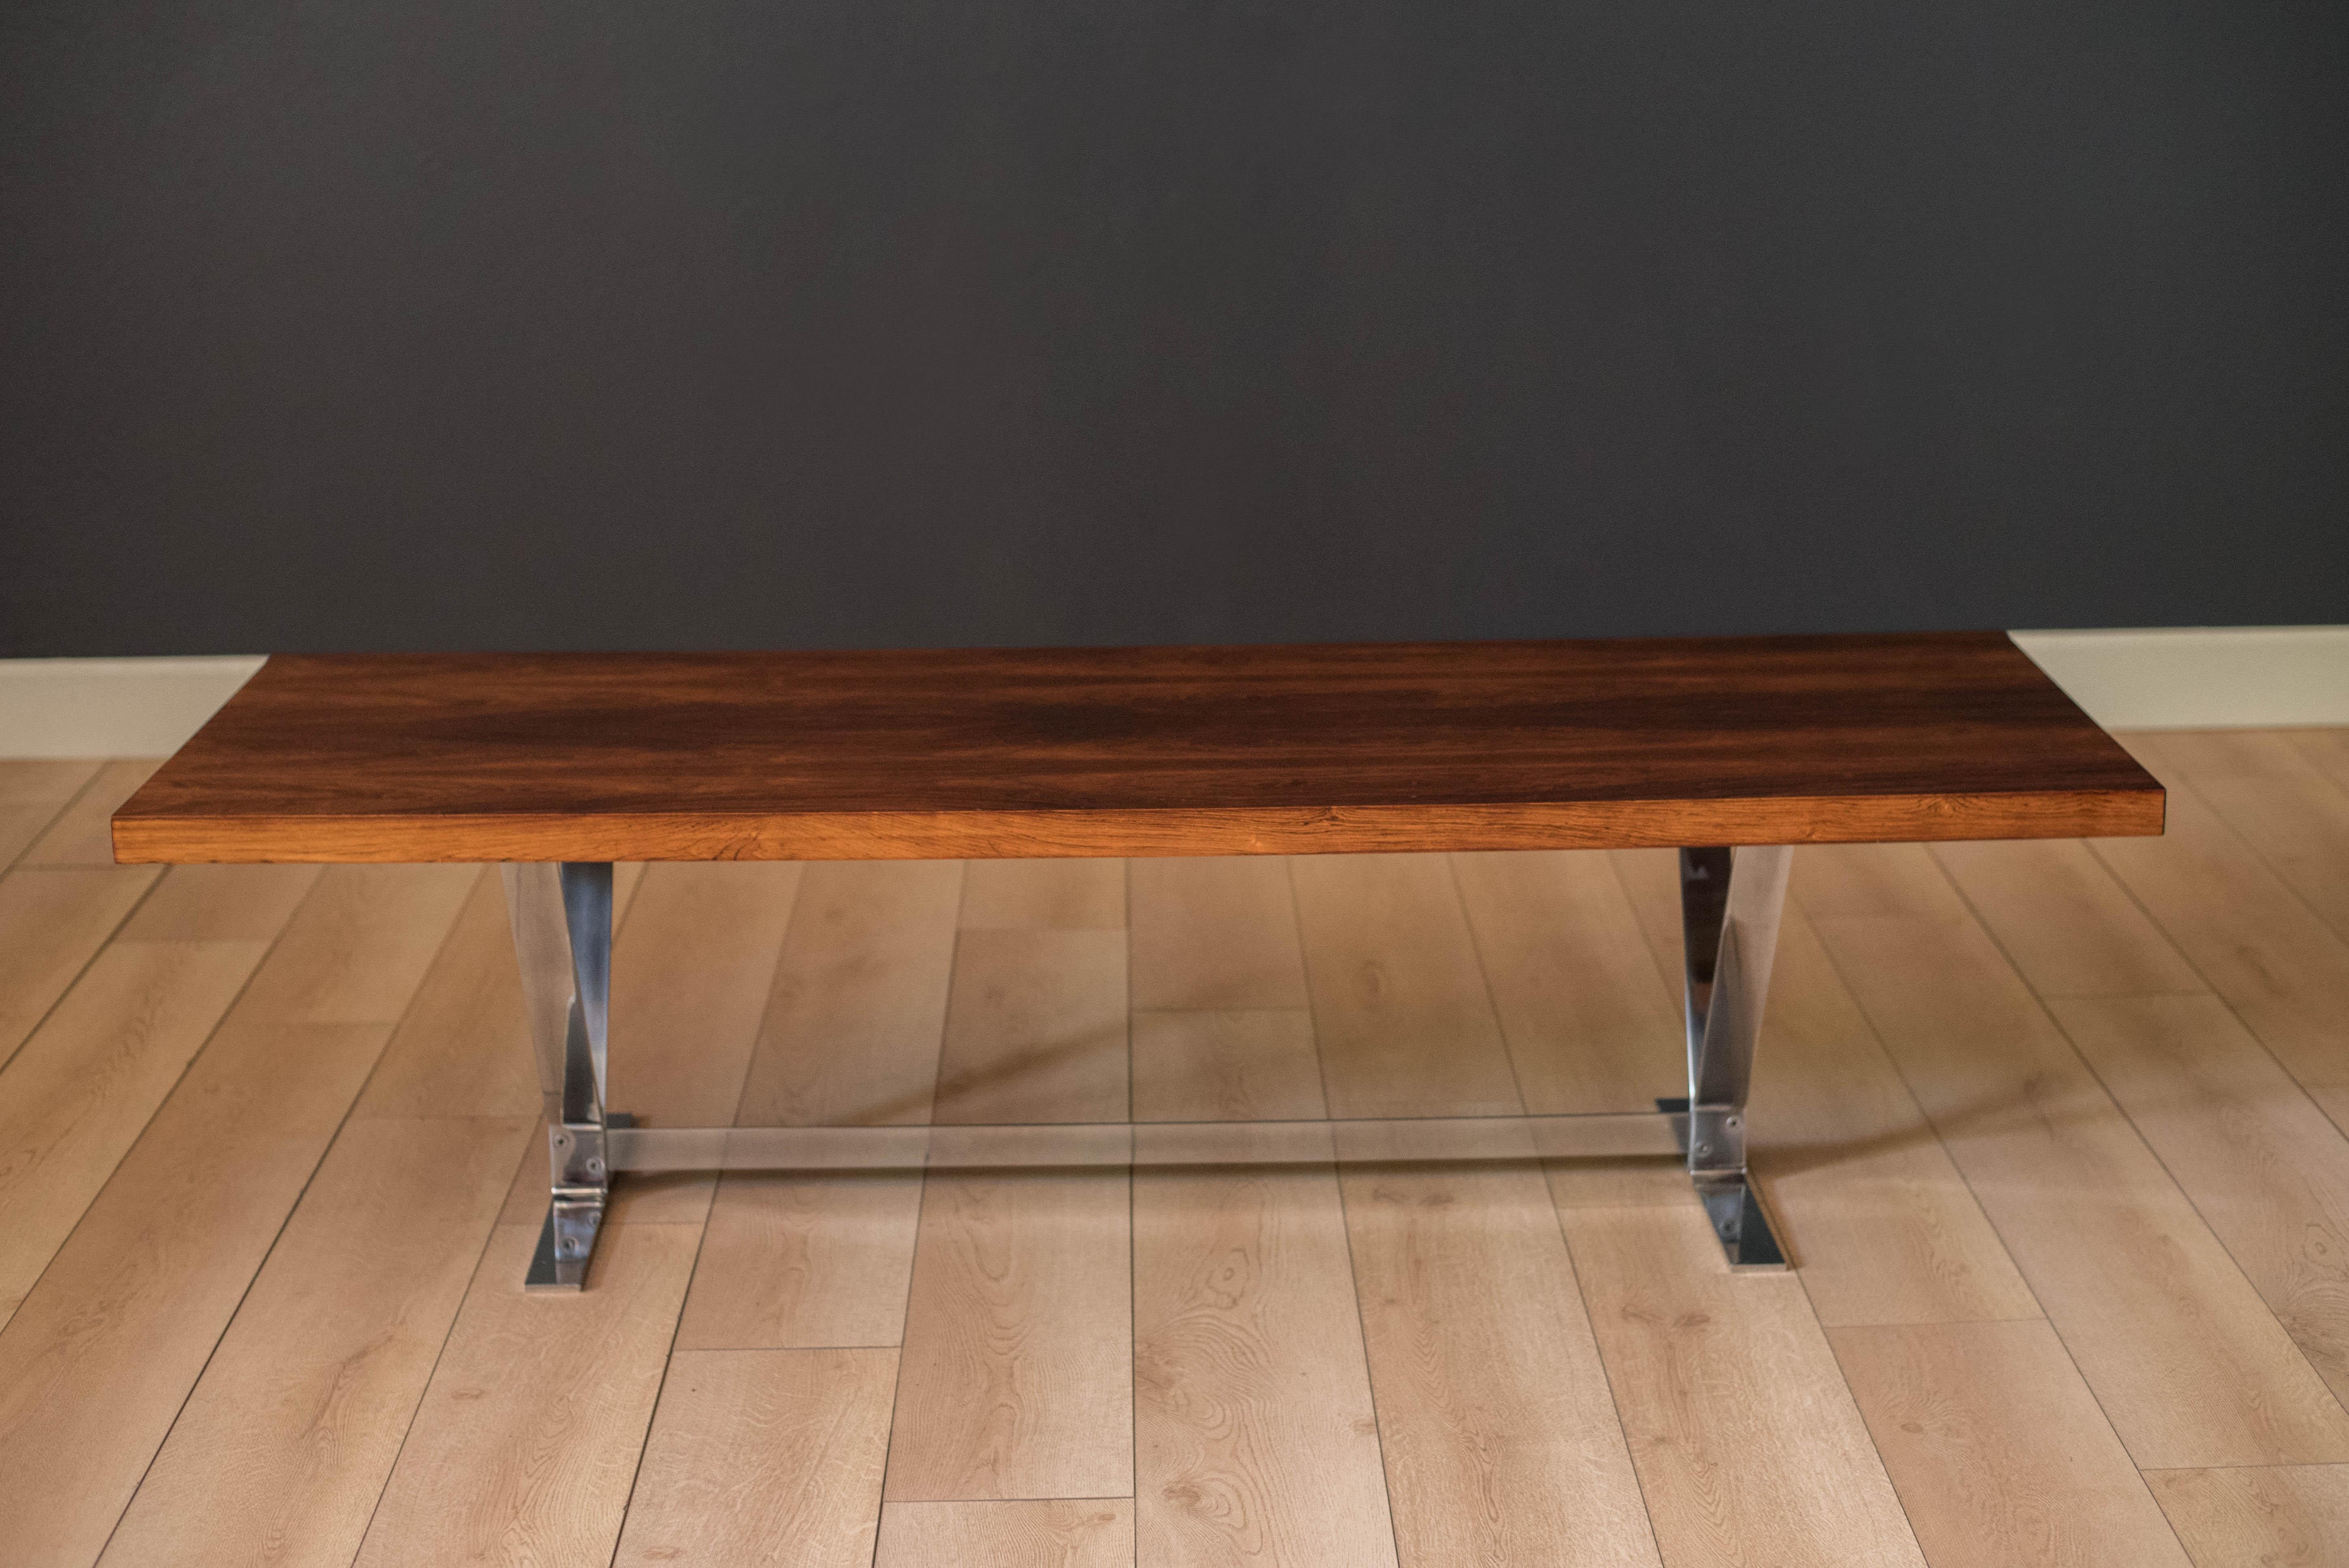 Classic Mid-Century Modern coffee table in rosewood by Georg Thams for Vejen Polstermøbelfabrik circa 1970s. This piece features a long and sleek rectangular tabletop supported by a heavy sculptural polished chrome base. Complements vintage or